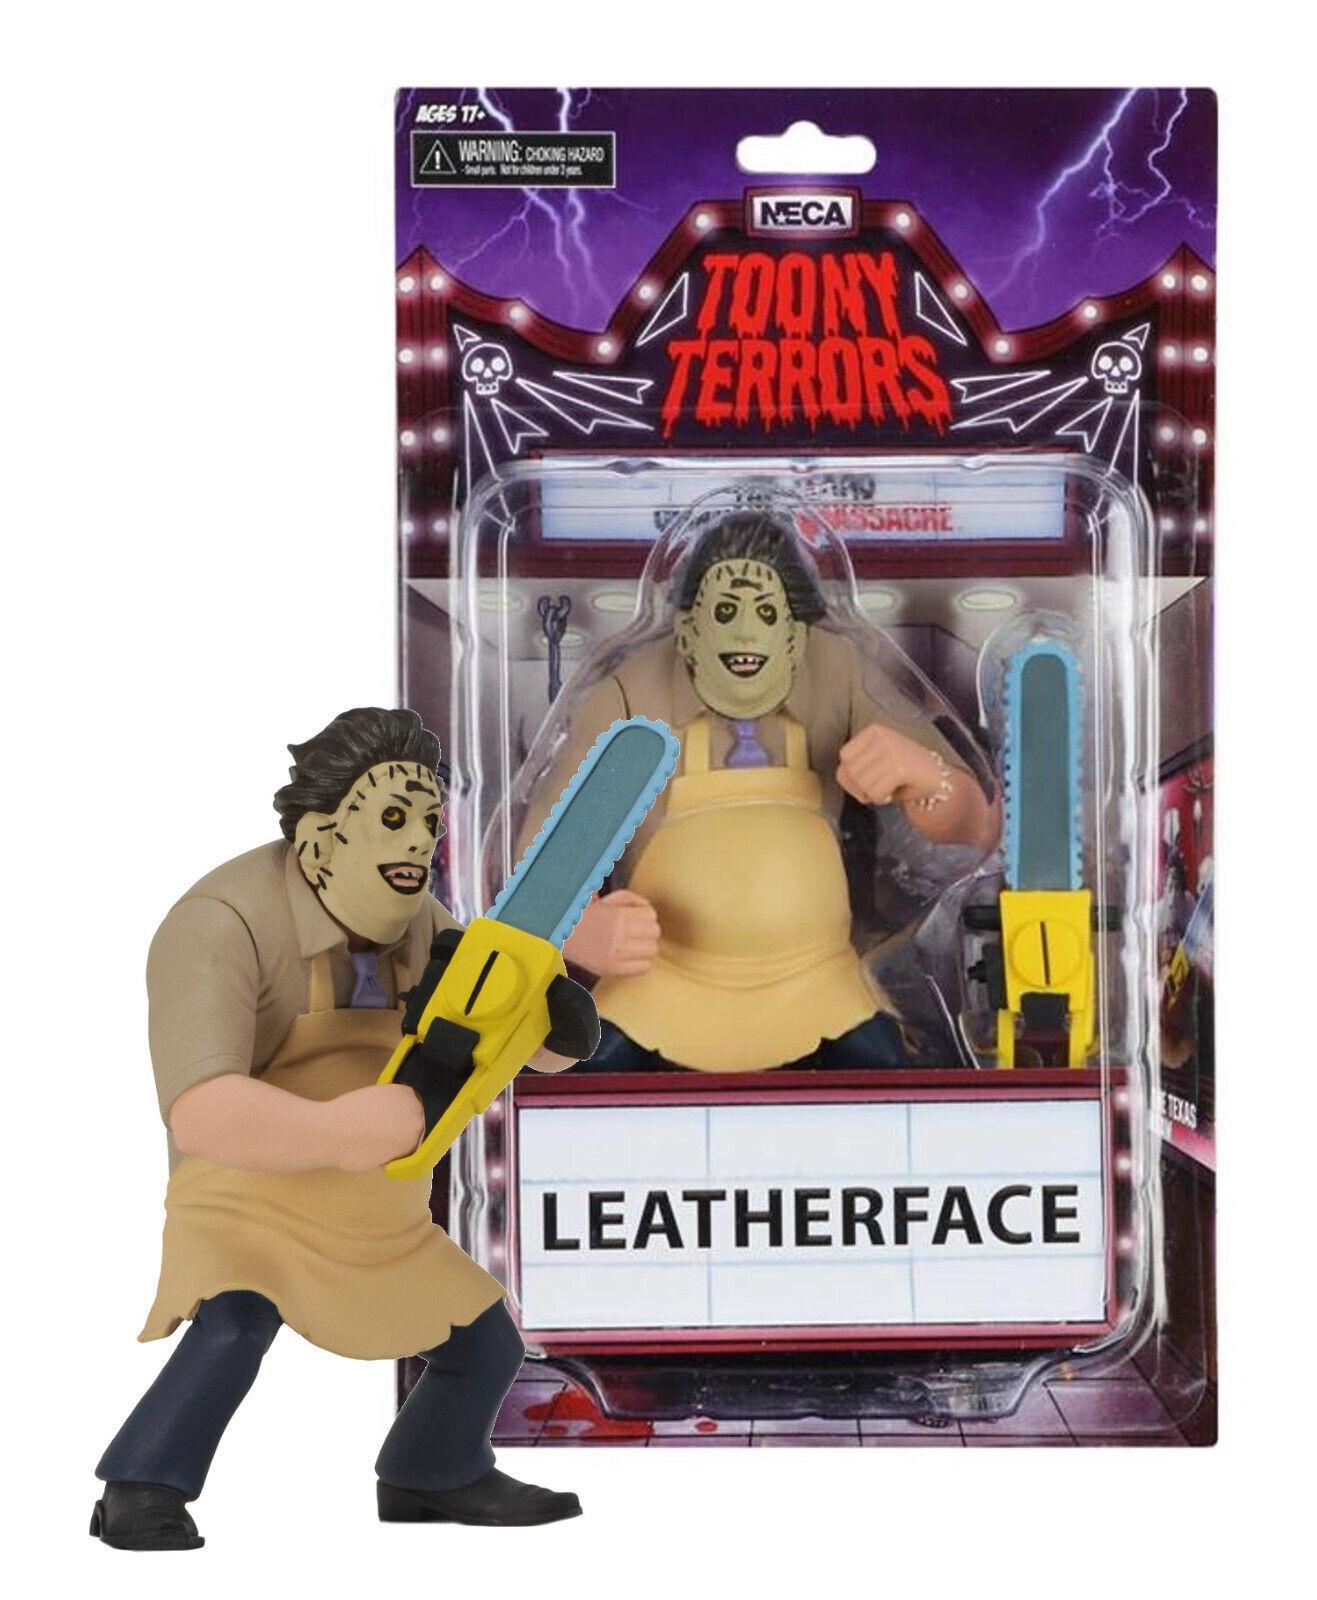 NECA Toony Terrors Leatherface Texas Chainsaw Massacre 6” Figure New in Package - $26.88